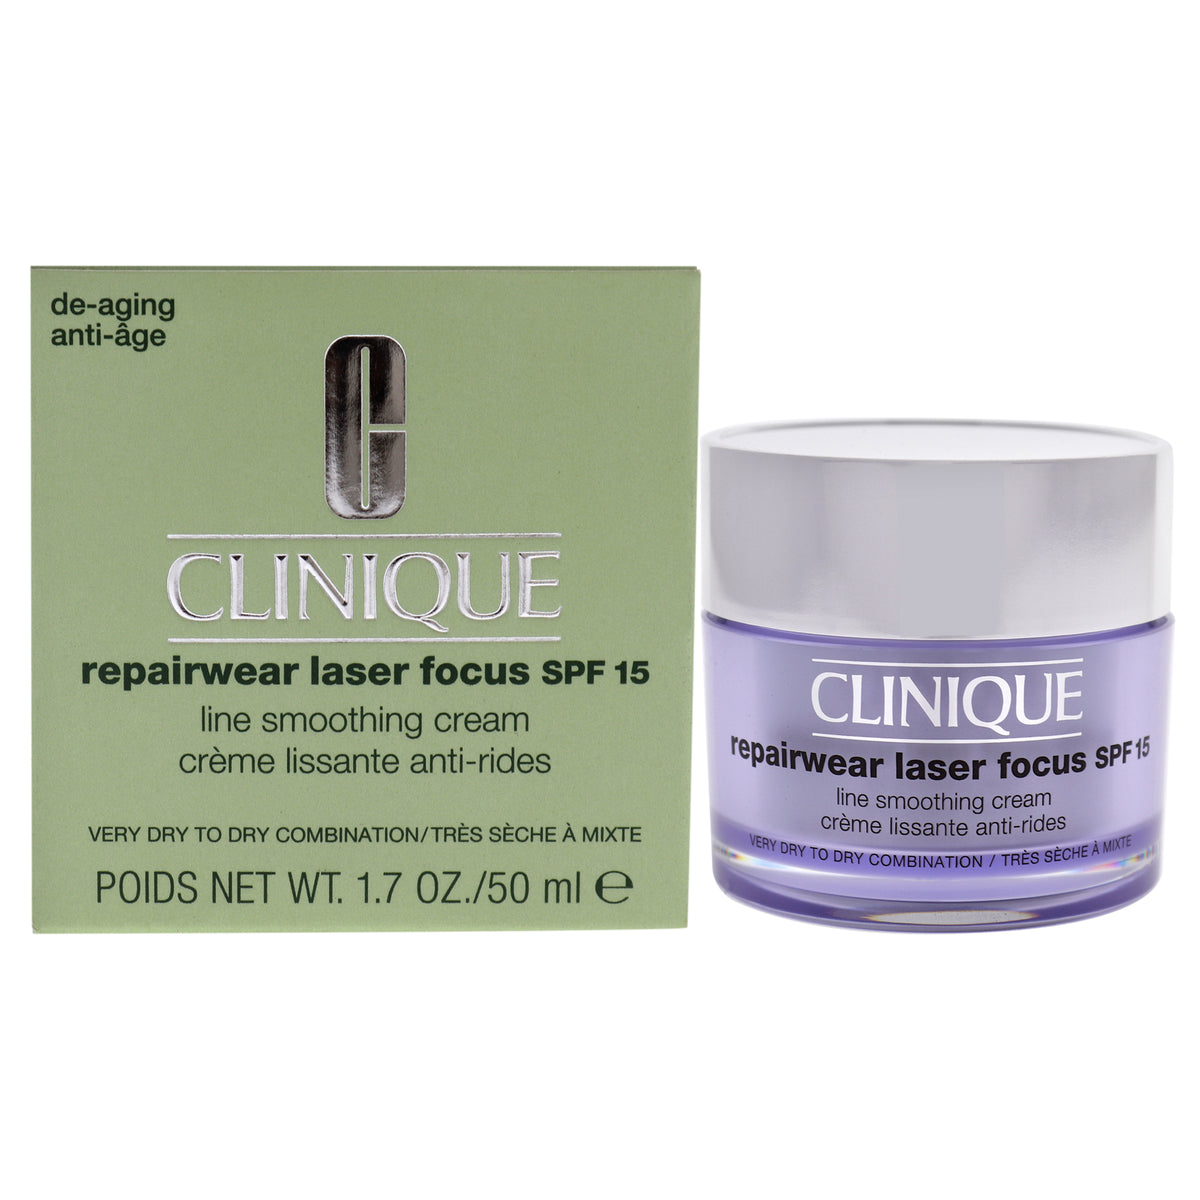 Repairwear Laser Focus Line Smoothing Cream SPF 15 - Very Dry to Dry Combination by Clinique for Women - 1.7 oz Cream